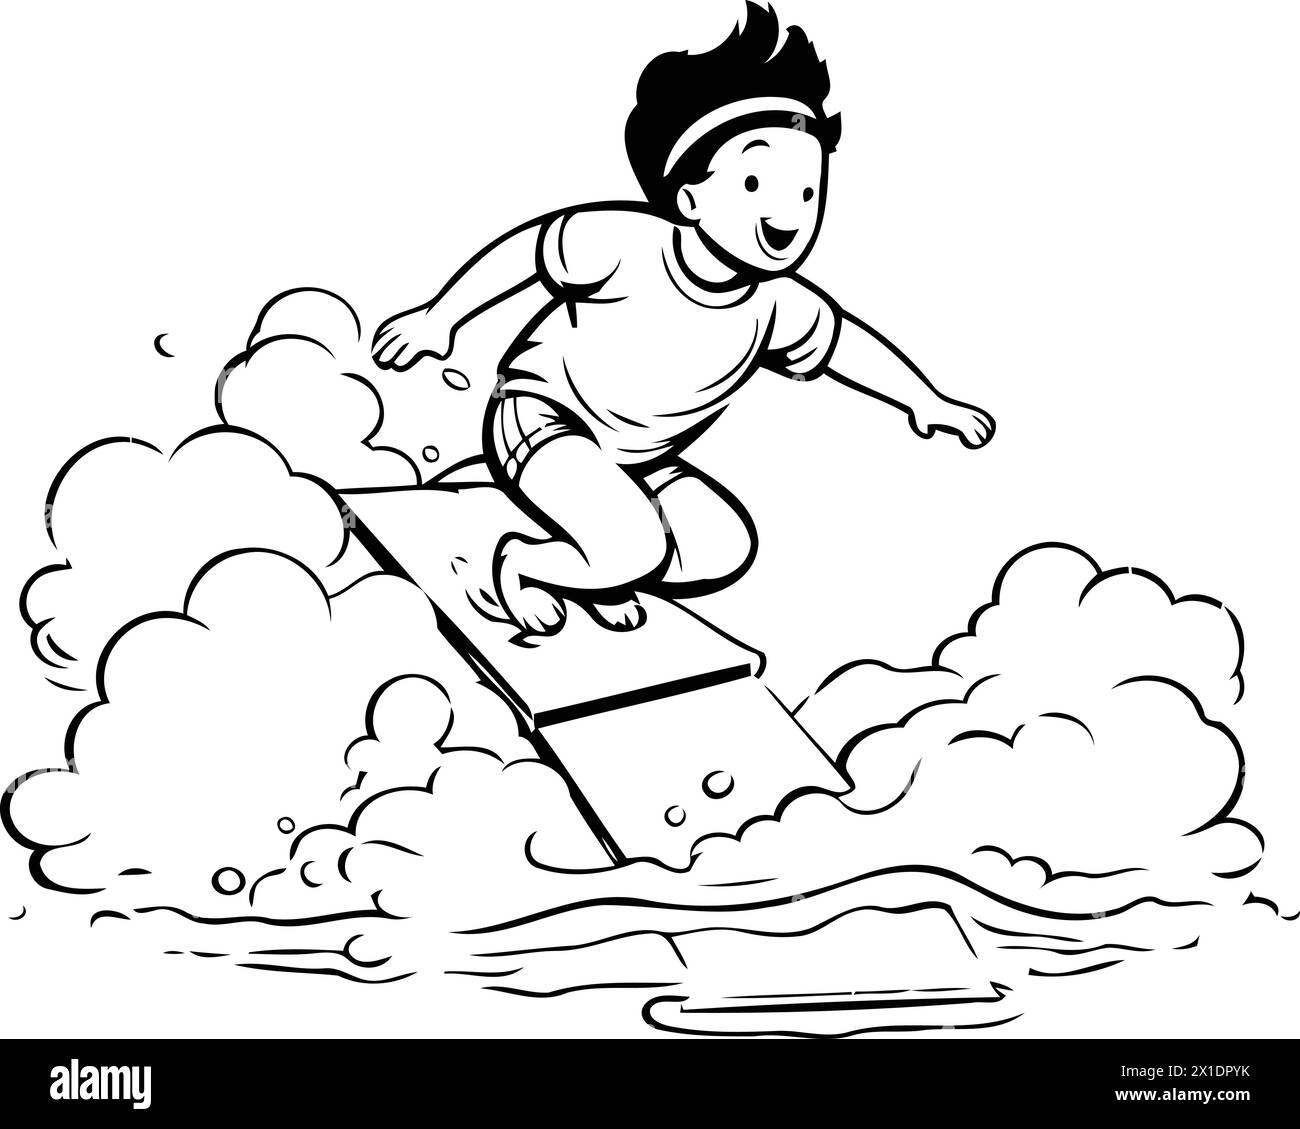 Boy surfing on a wave. Vector illustration in a cartoon style. Stock Vector